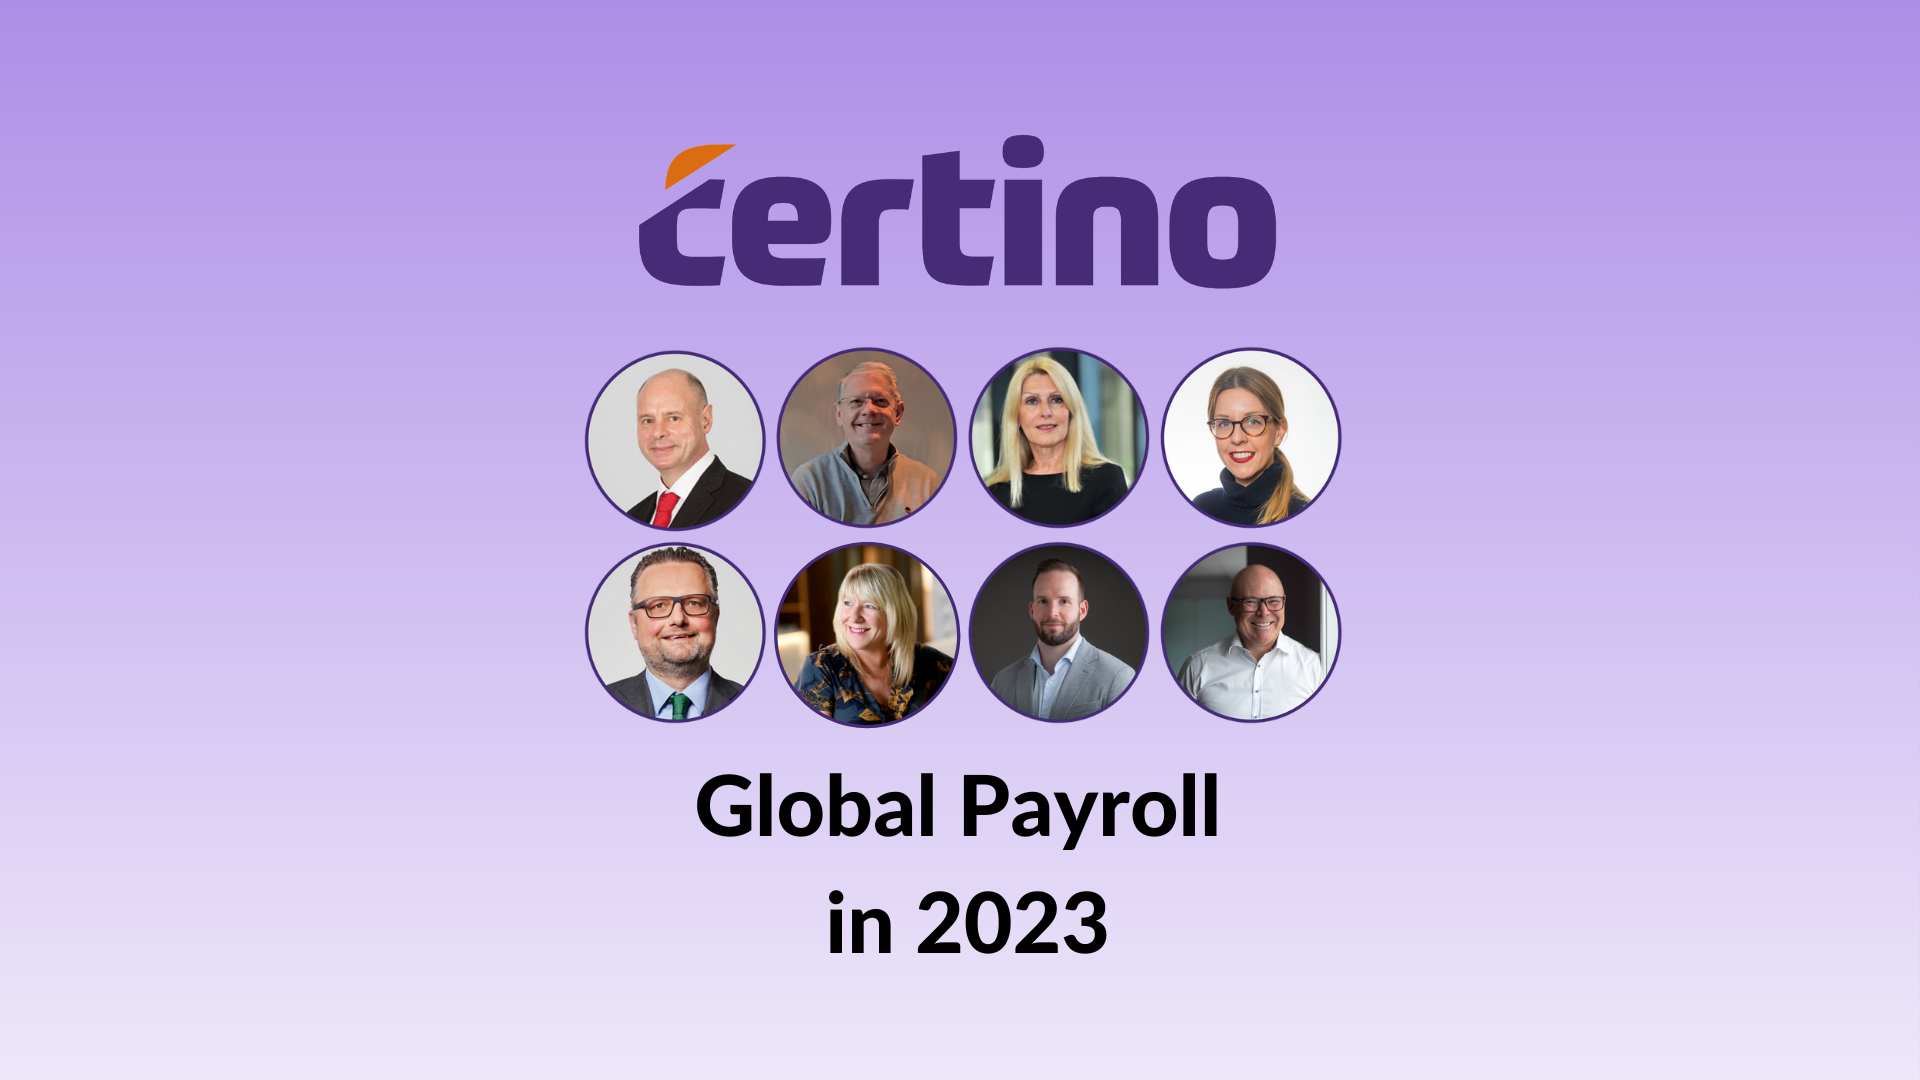 Global Payroll in 2023: What do the experts say?